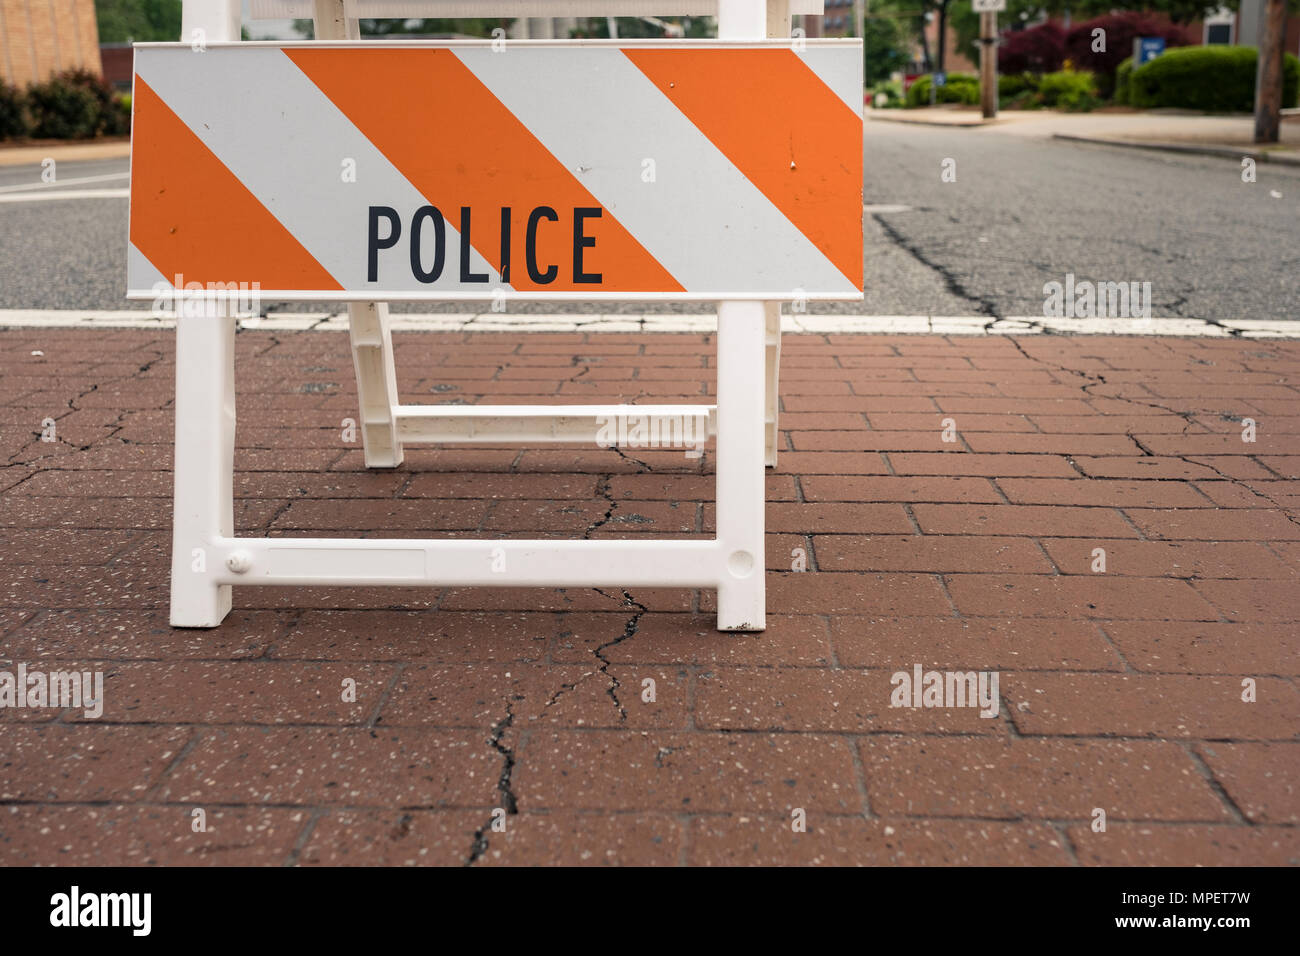 Police warning hazard sign controlled access to a restricted area Stock Photo